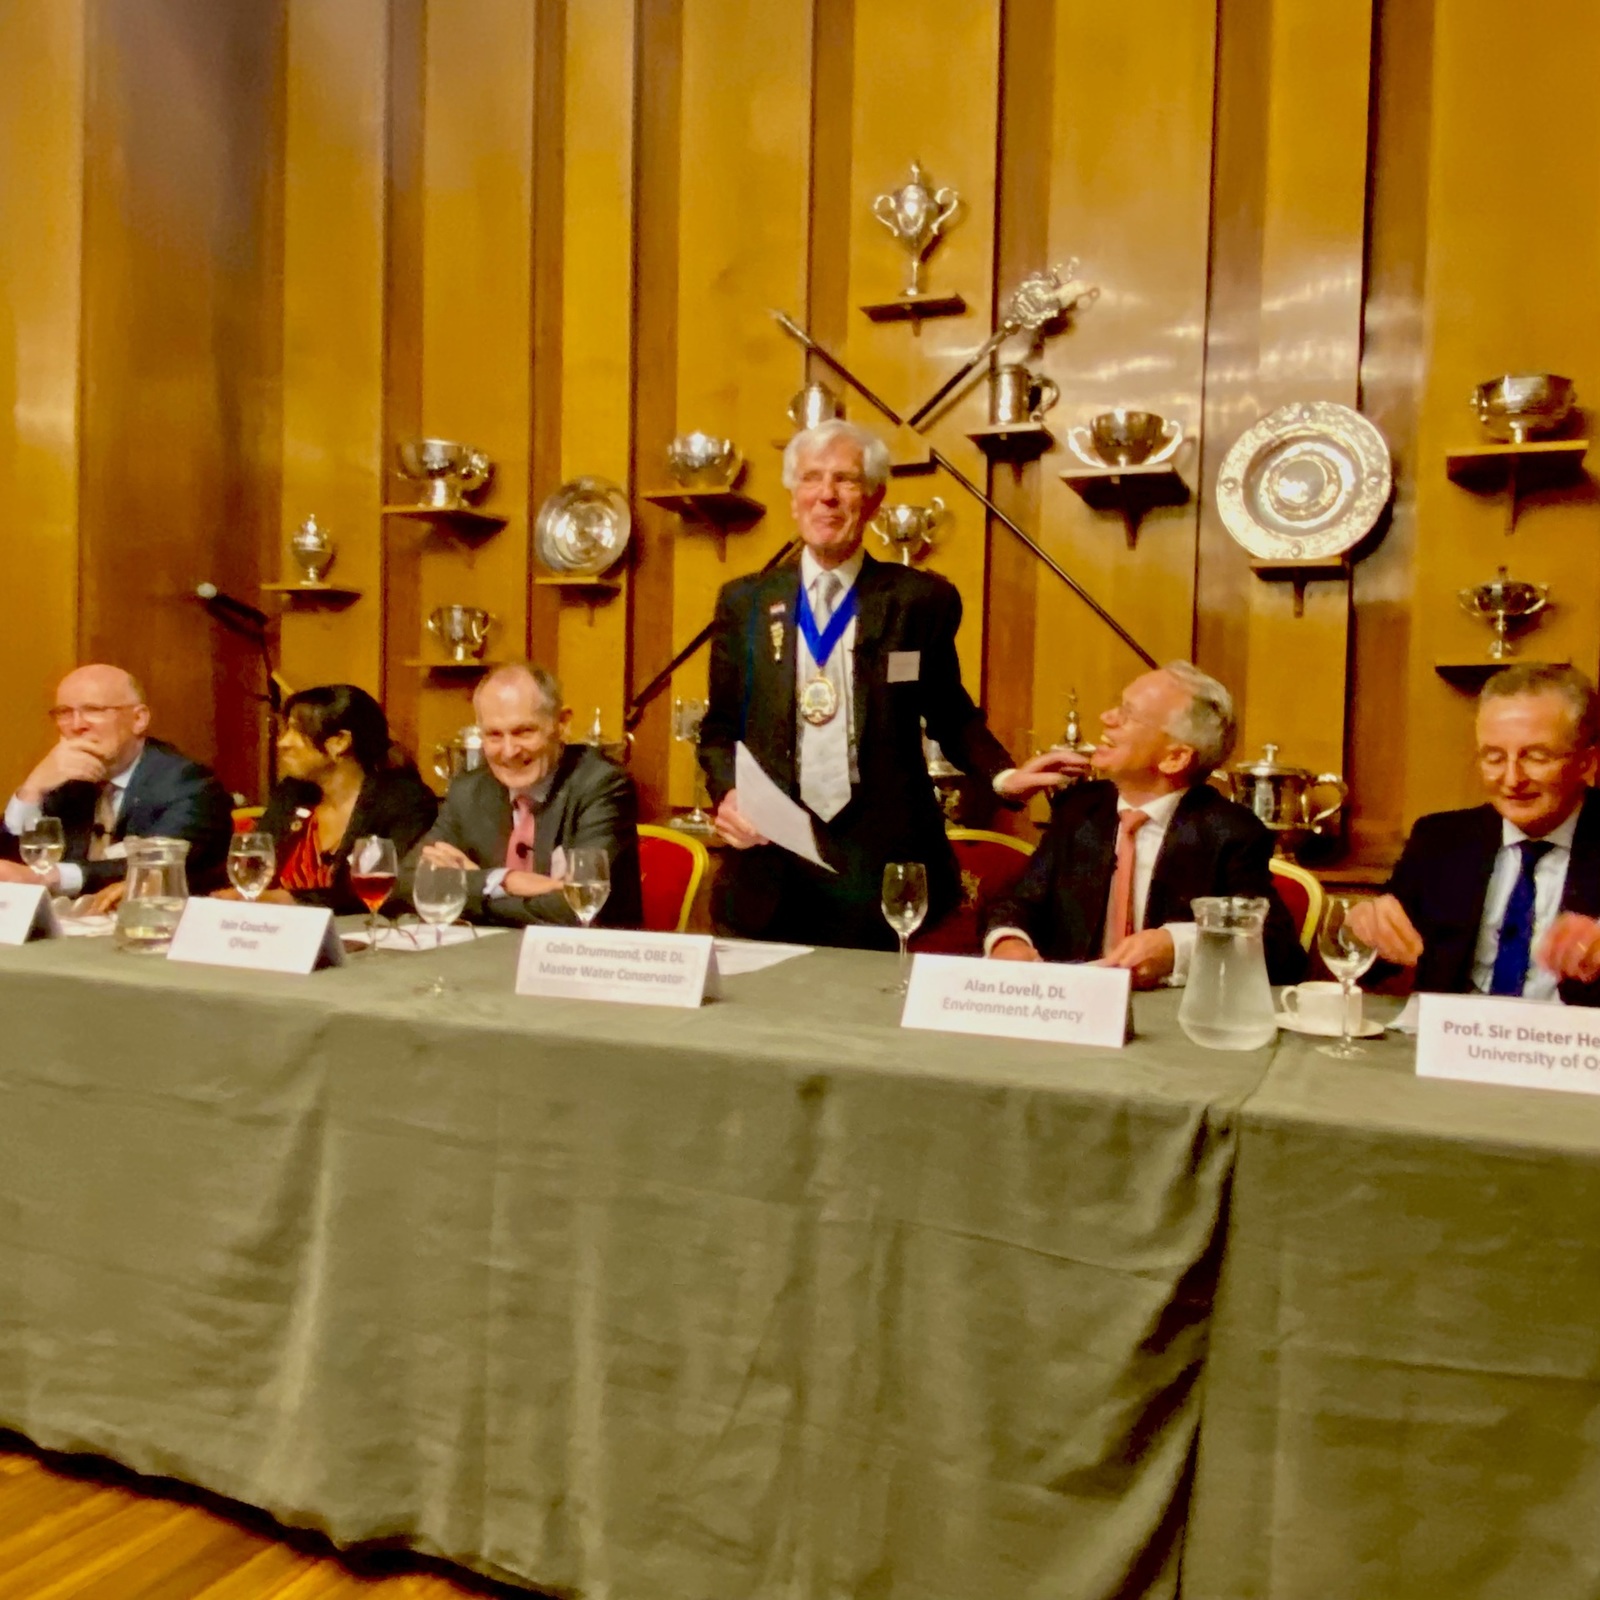 21 Mar 23 - A truly stimulating and educational evening at The City Water Debate held at Bakers' Hall.